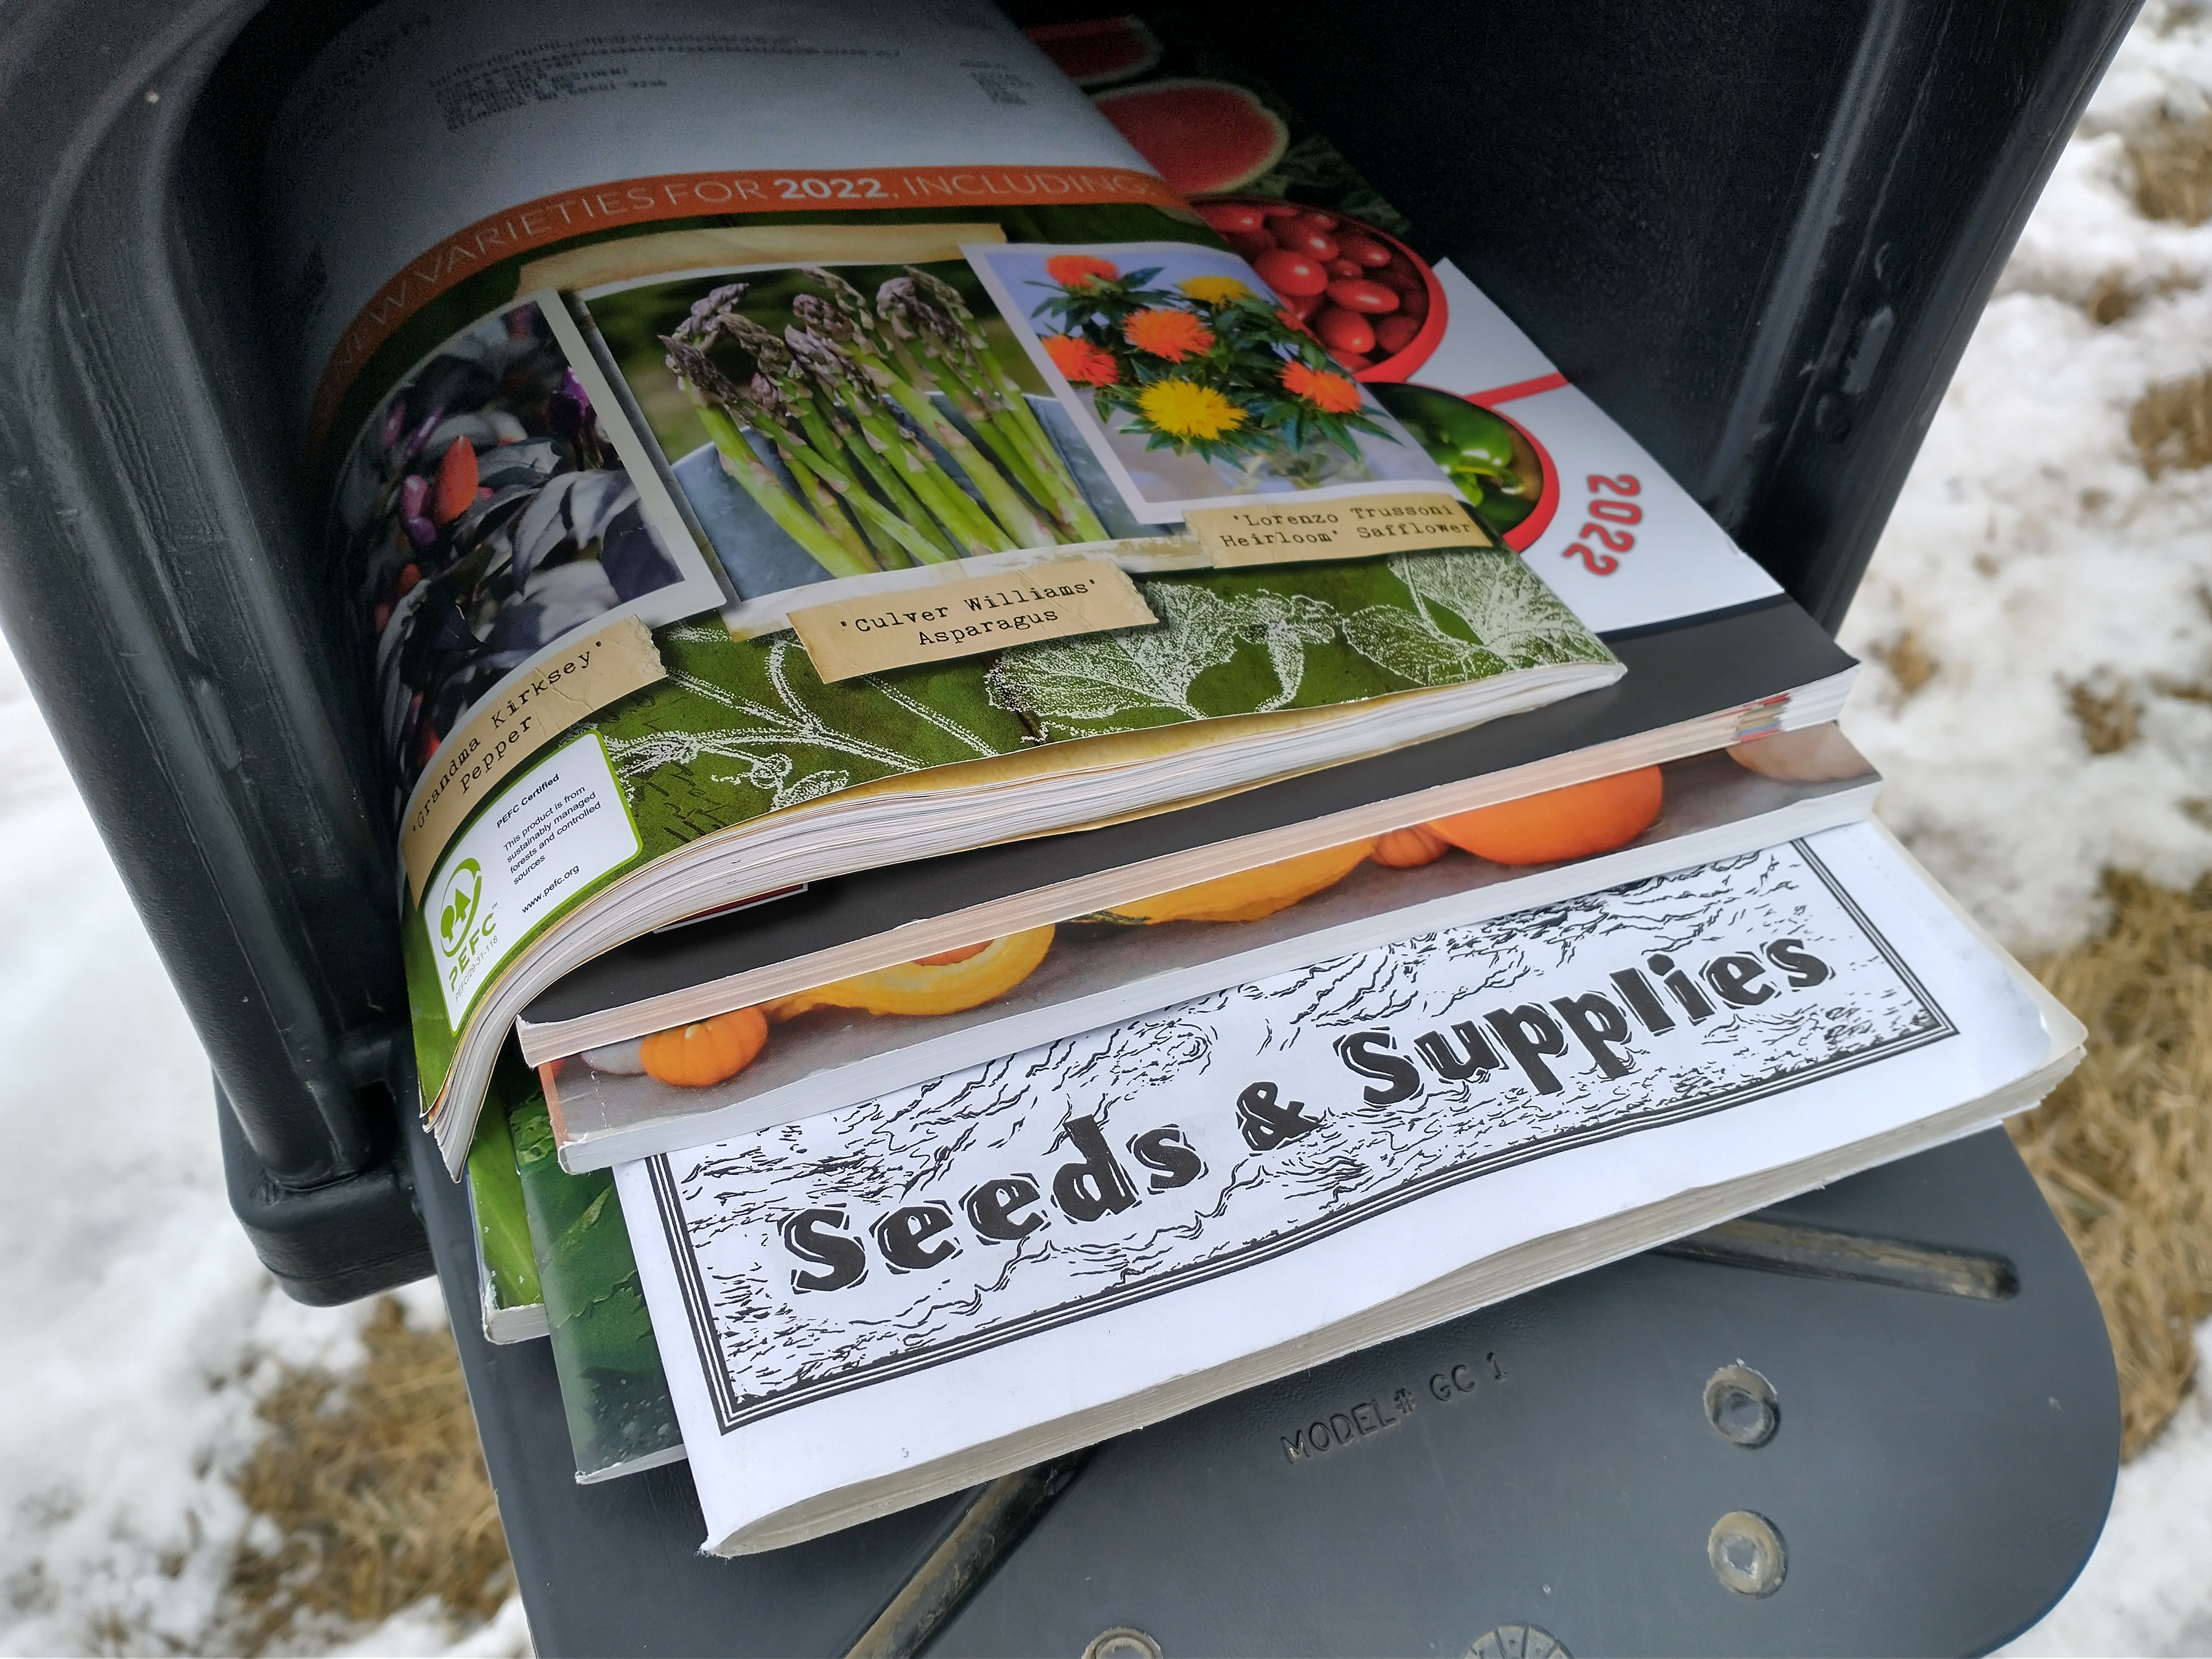 Though the weather is cold, now is a great time to order seed catalogs, as some seed varieties are already selling out. (NDSU photo)